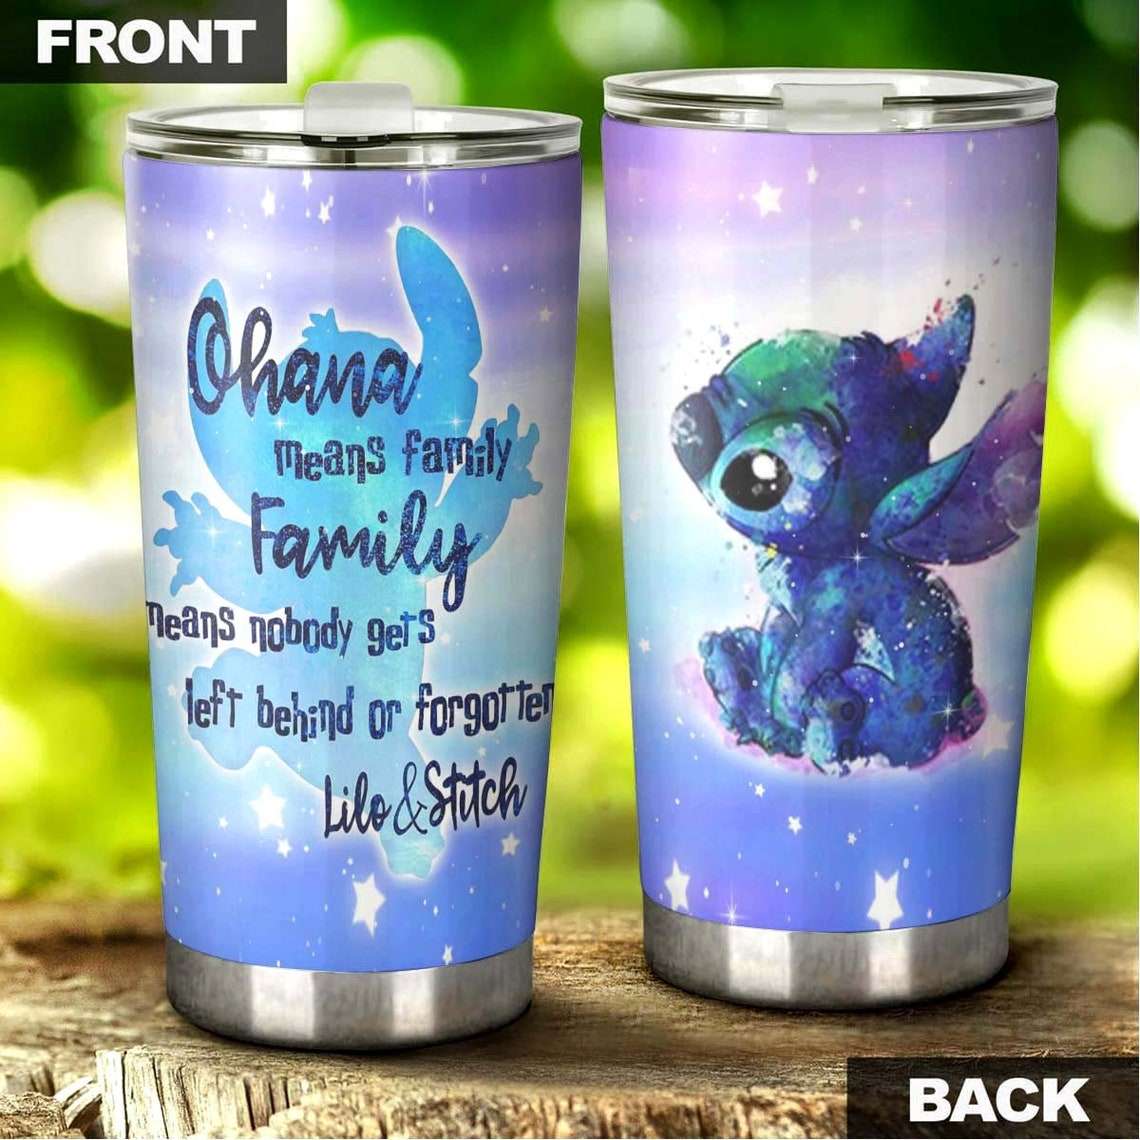 https://musicdope80s.com/wp-content/uploads/2023/02/Cartoon_Movie_Ohana_Means_Family_Lilo_Stitch_Stainless_Steel_Tumbler_For_Disney_Fan_oq0ucw.jpg